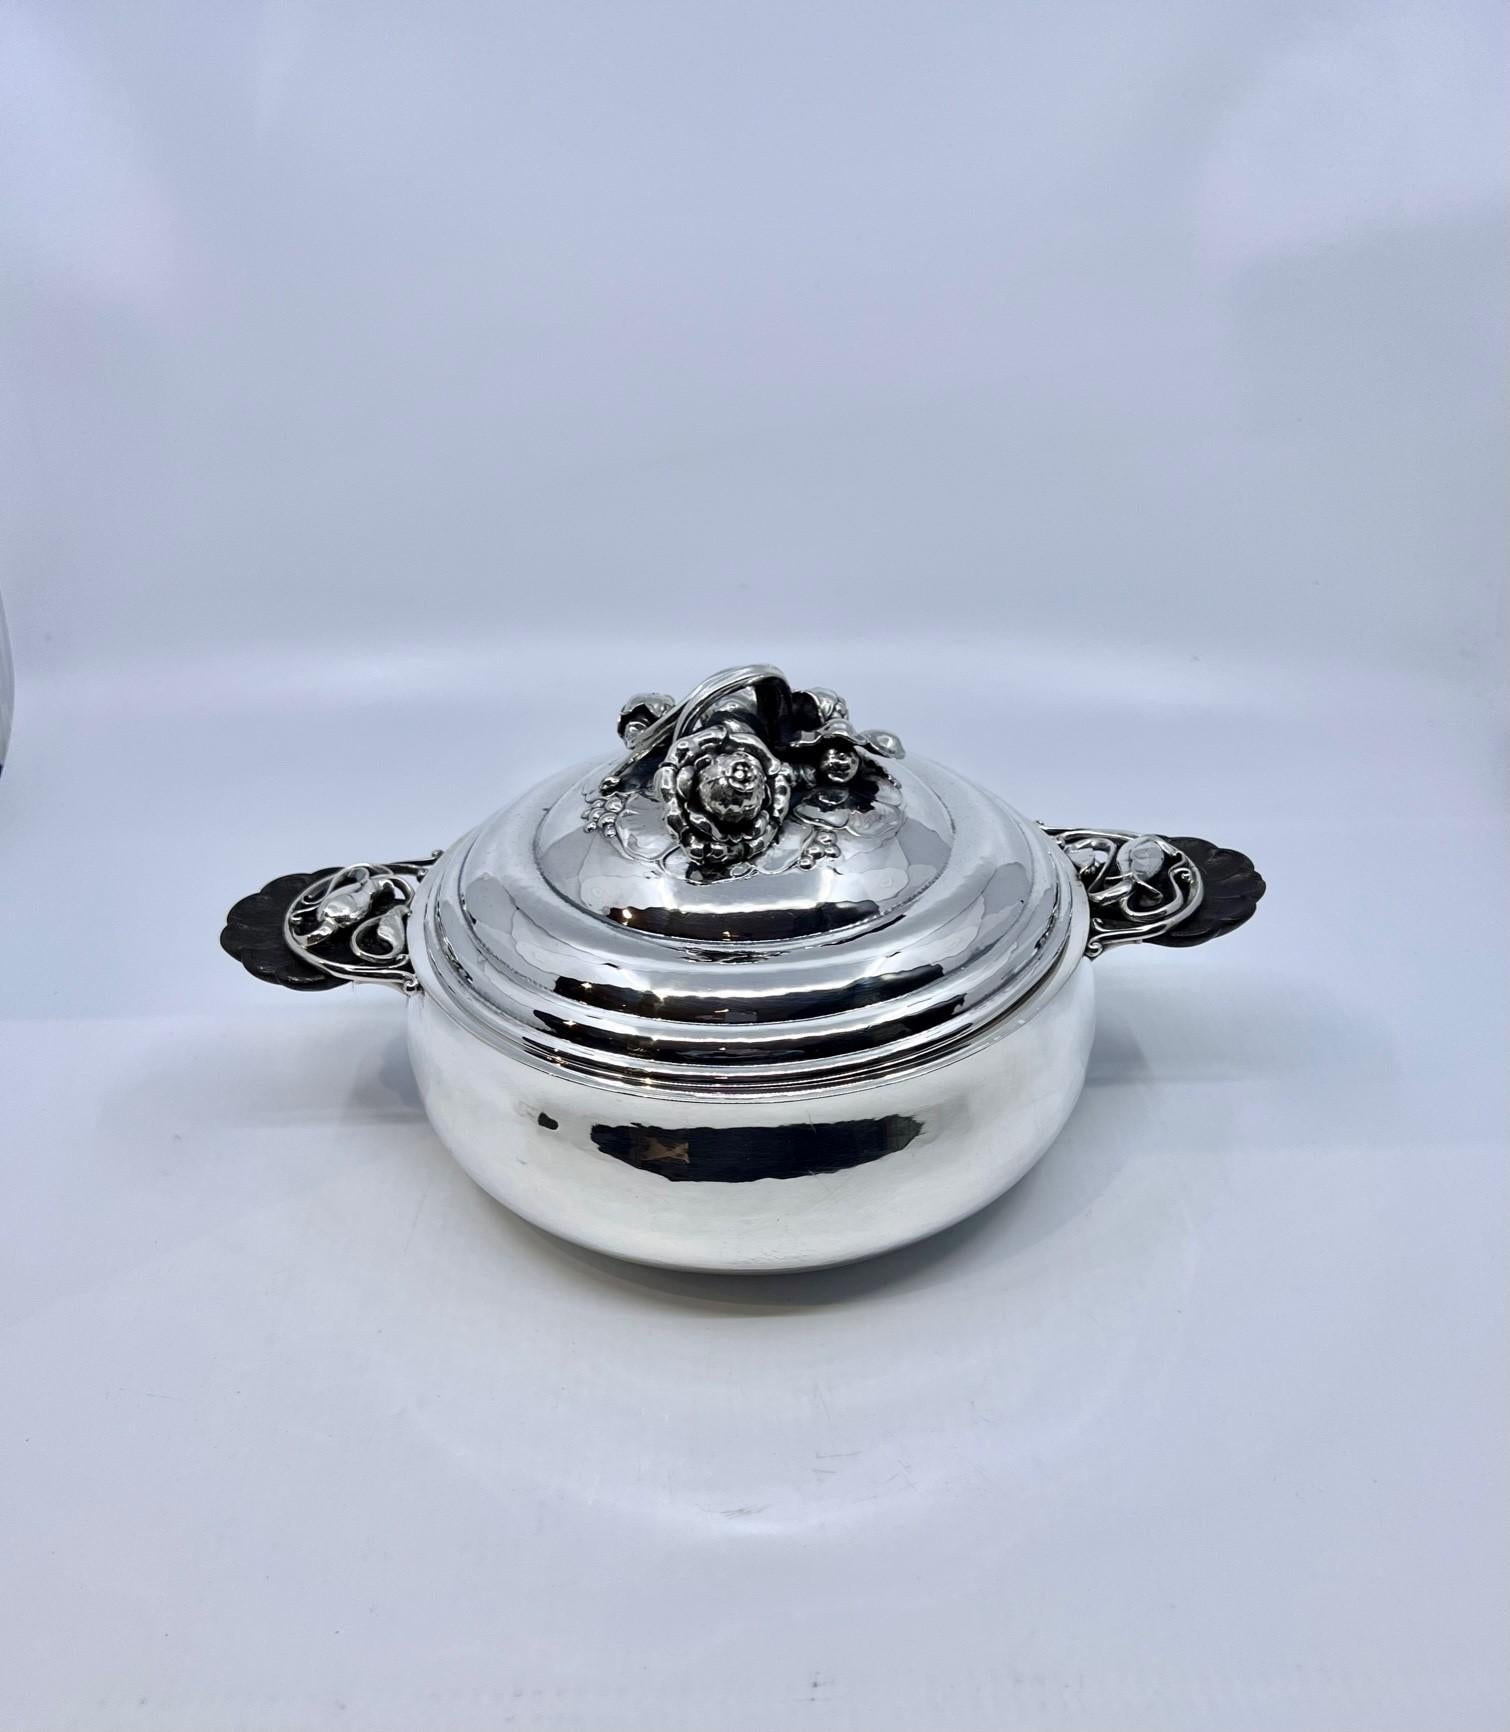 An ornate art nouveau Danish sterling silver Georg Jensen lidded tureen with shell carved ebony handles, design #417A by Georg Jensen from circa 1920. This design is referred to as 